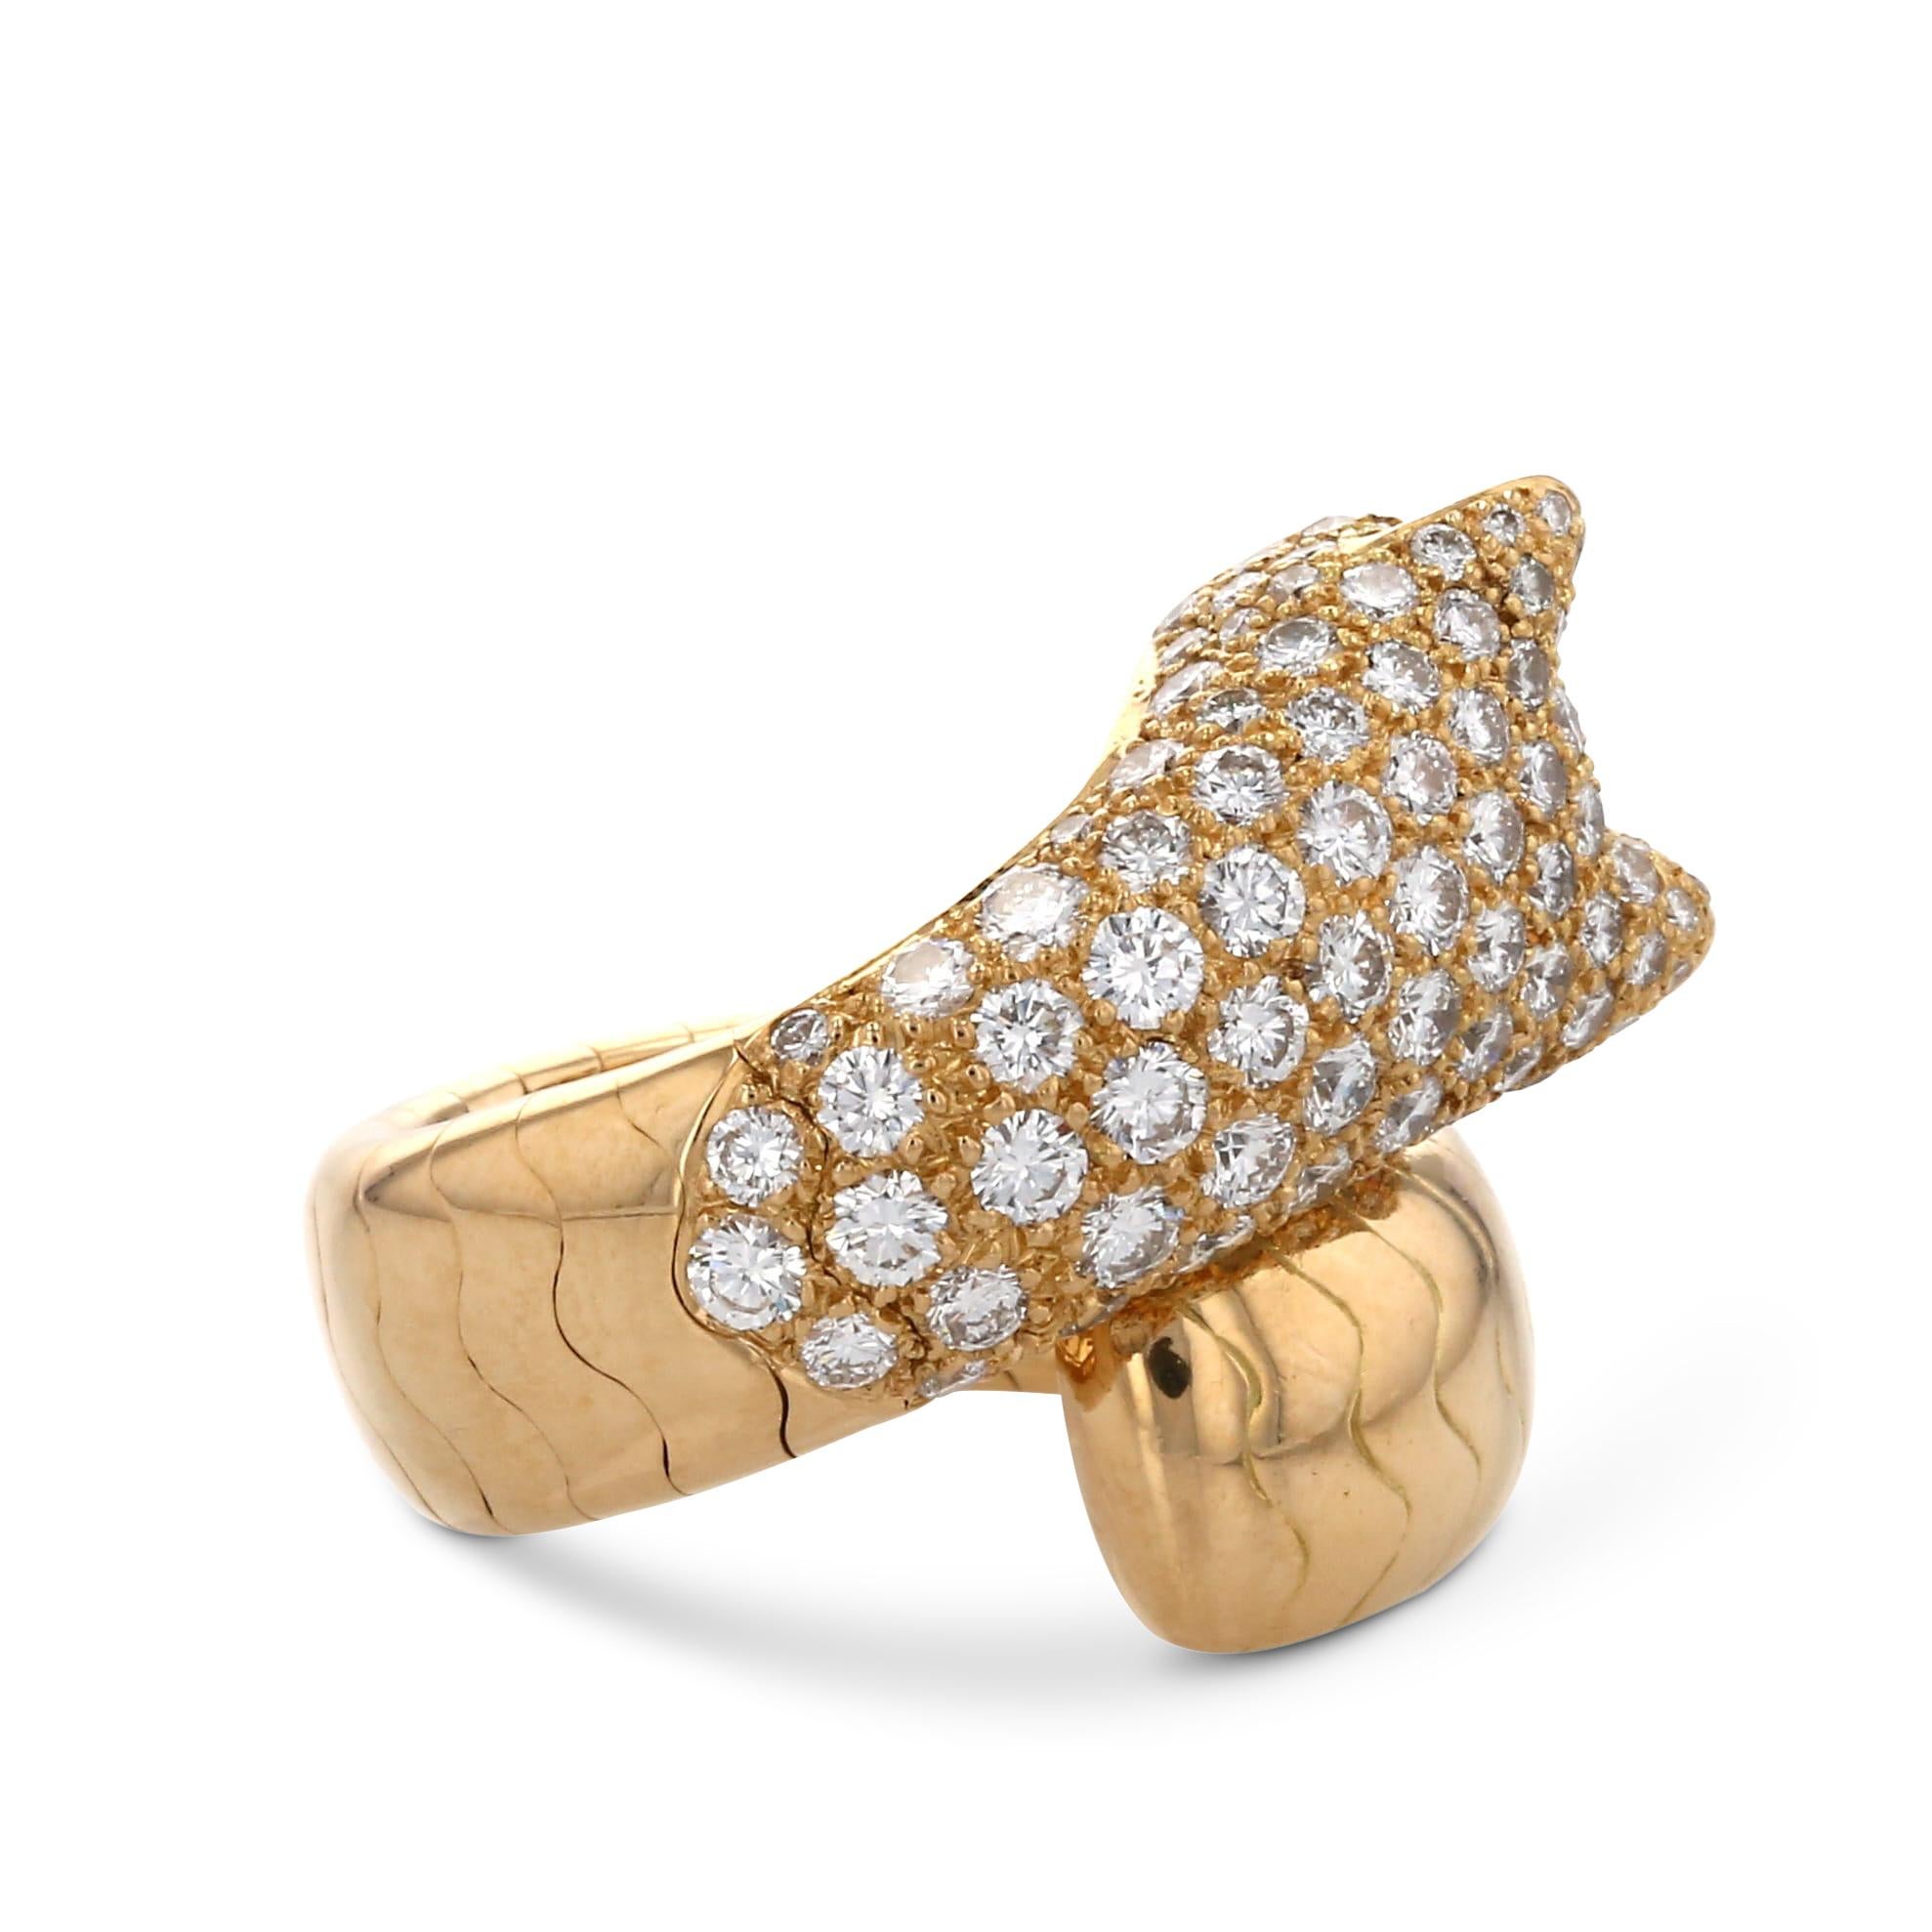 Authentic Cartier ring from the Panthère de Cartier collection centering on a single panther, an iconic symbol of the house. The ring is crafted in 18 karat yellow gold and set with approximately 2.14 carats of round brilliant cut diamonds (E-F